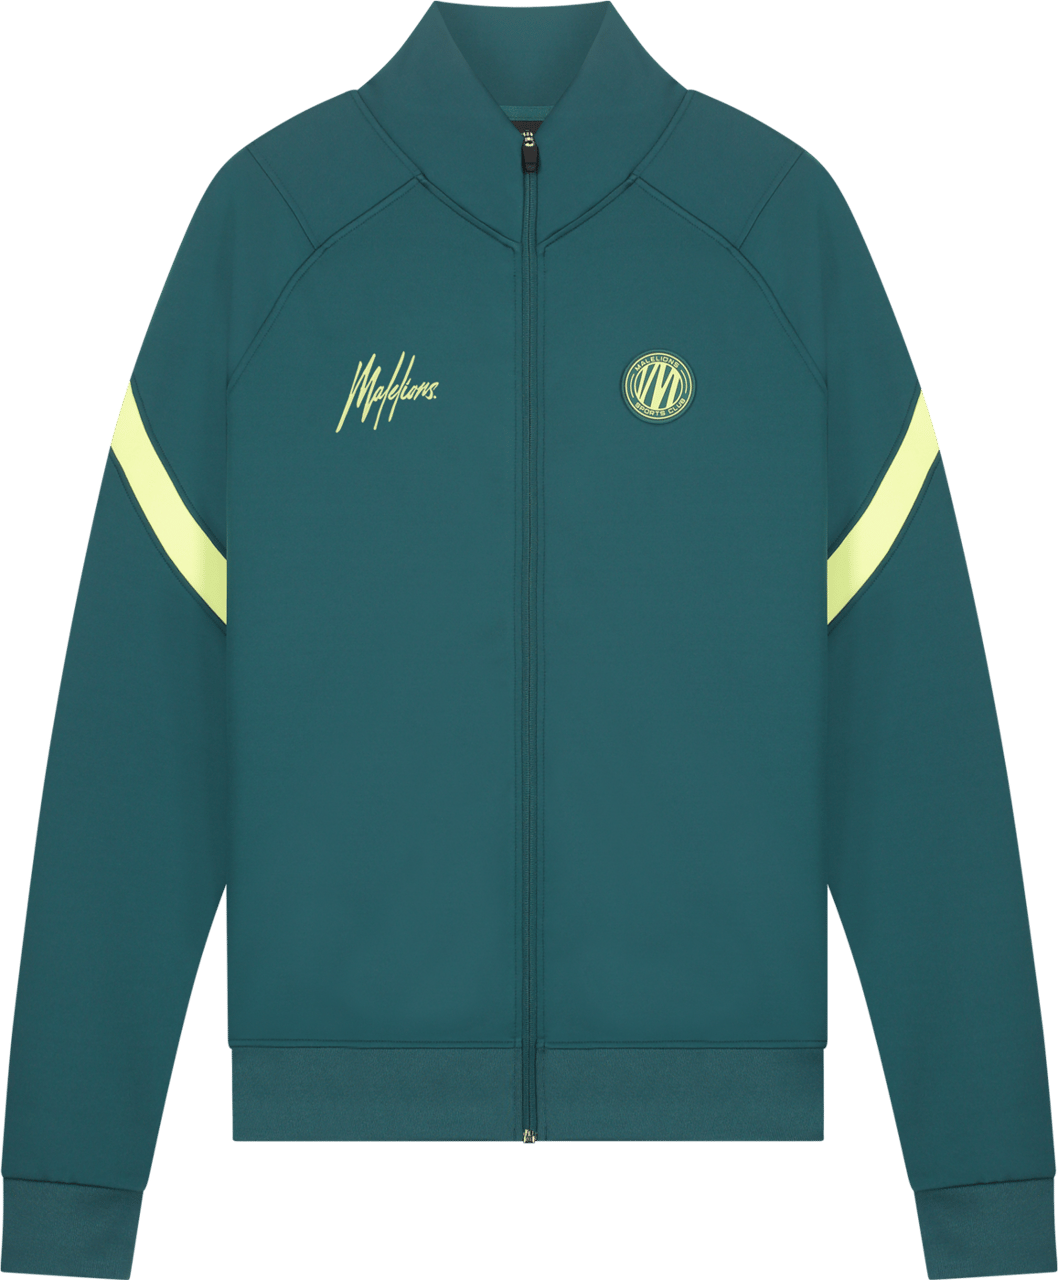 Malelions Pre-Match 2 Vest - Teal/Lime Groen